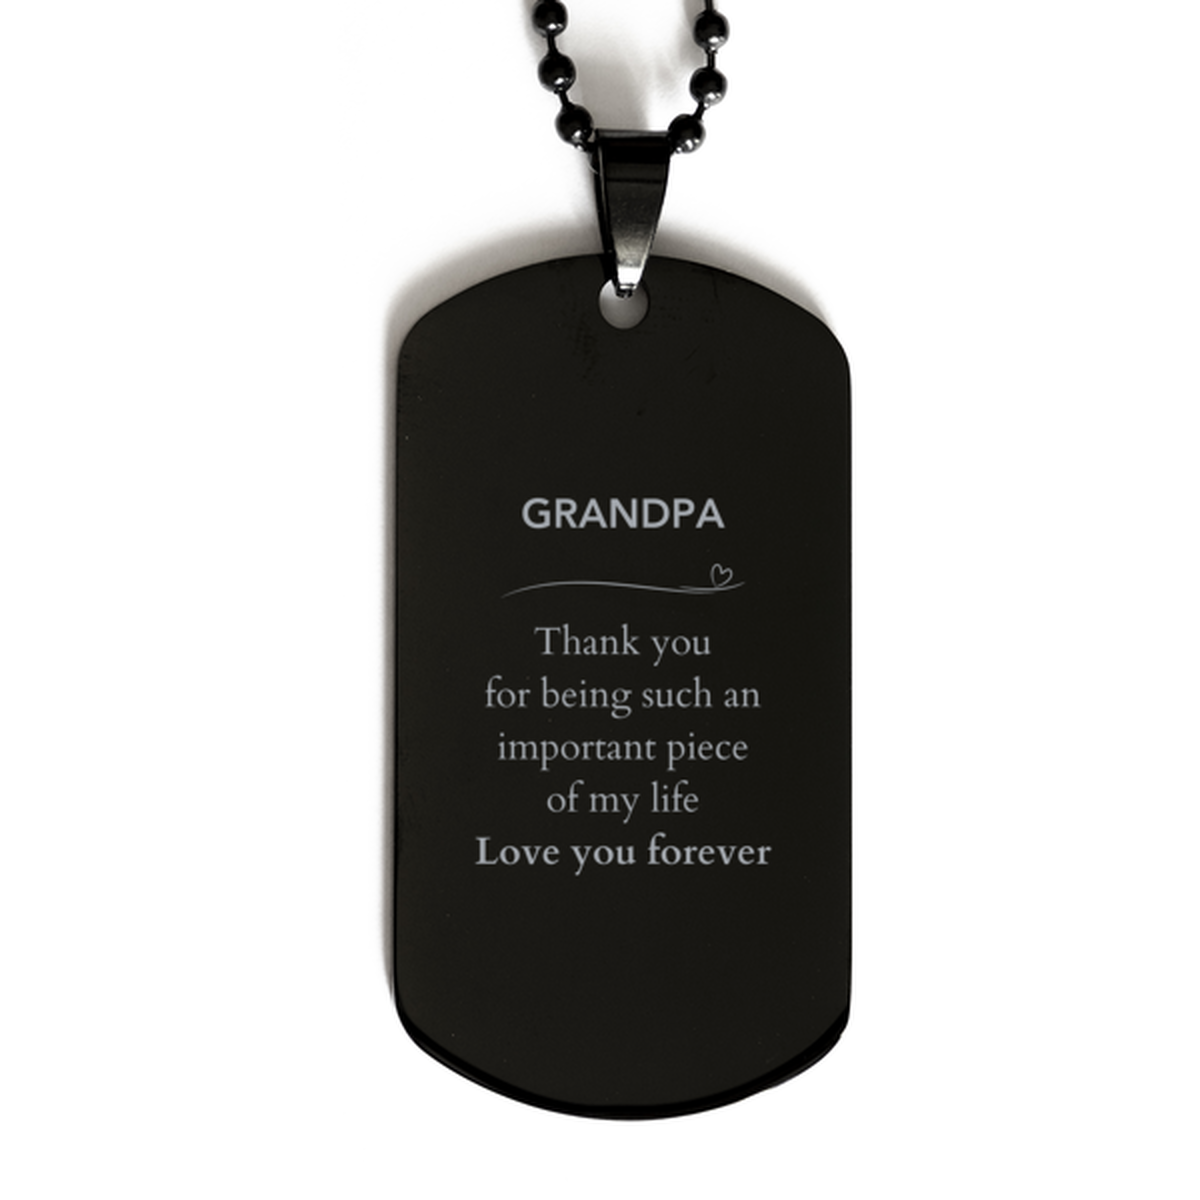 Appropriate Grandpa Black Dog Tag Epic Birthday Gifts for Grandpa Thank you for being such an important piece of my life Grandpa Christmas Mothers Fathers Day